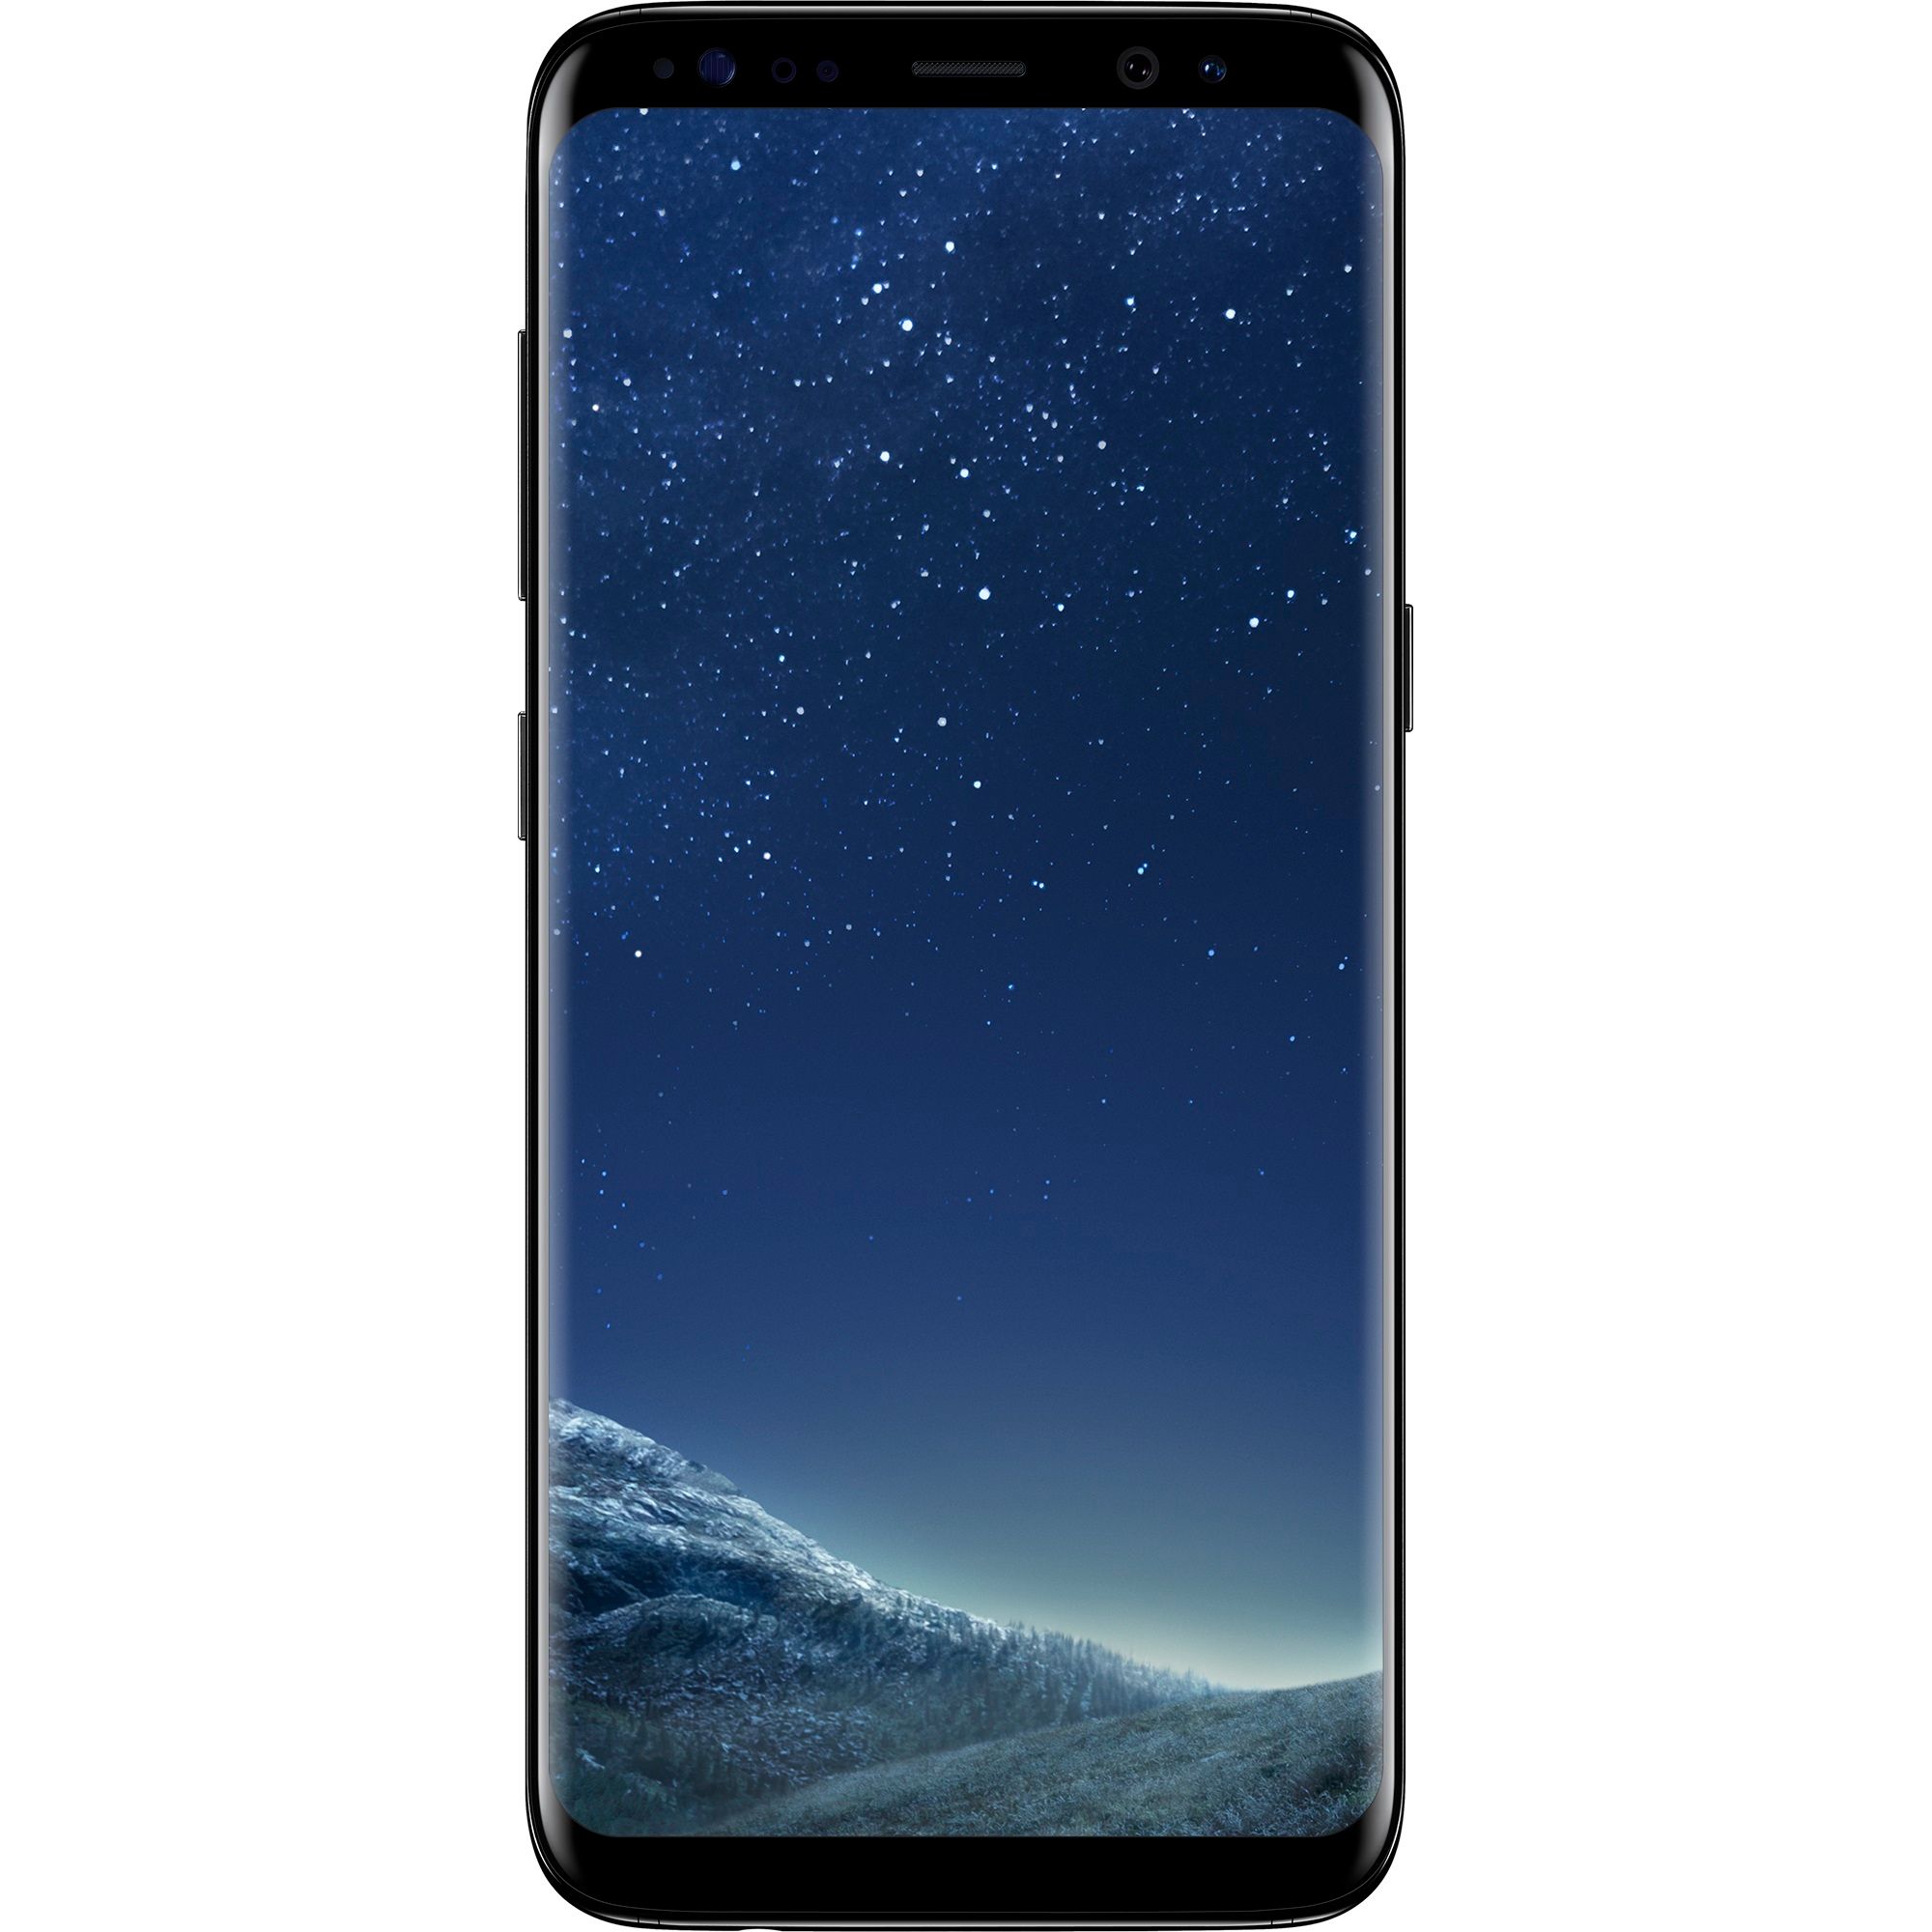 Samsung Galaxy S8 gets its October security update in Germany